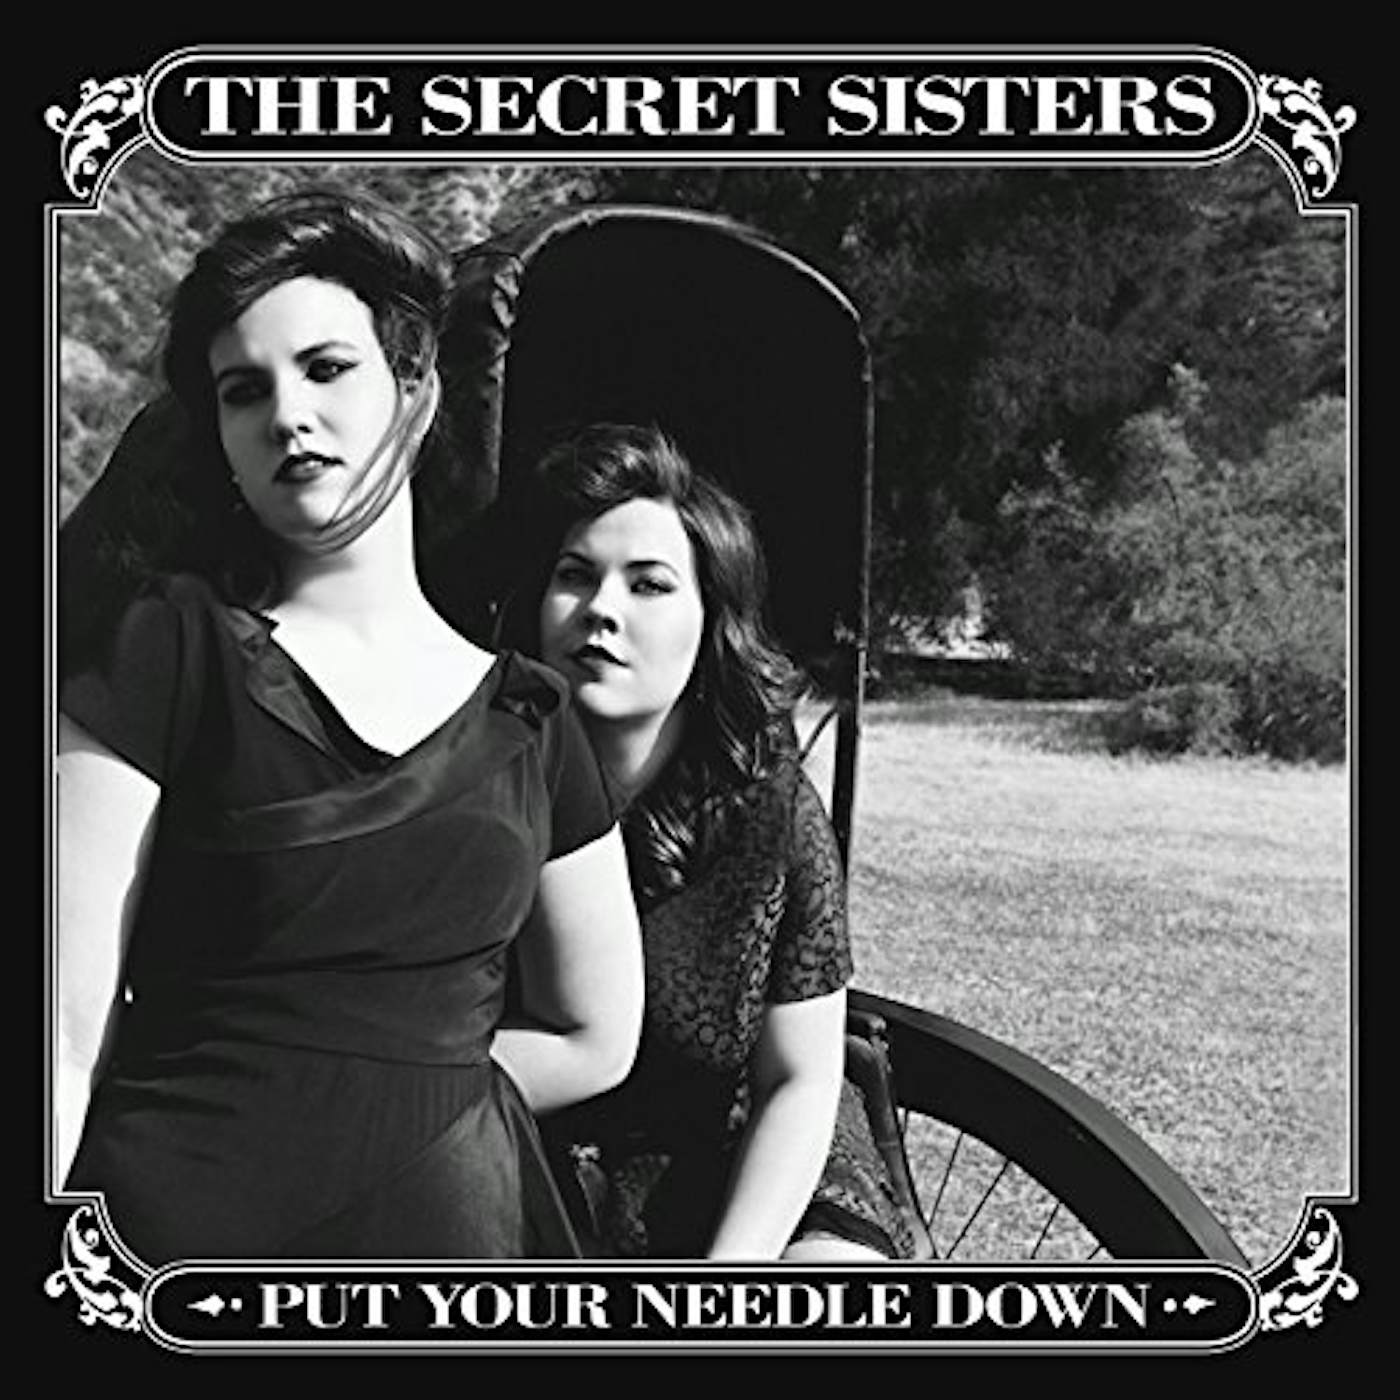 The Secret Sisters PUT YOUR NEEDLE DOWN CD